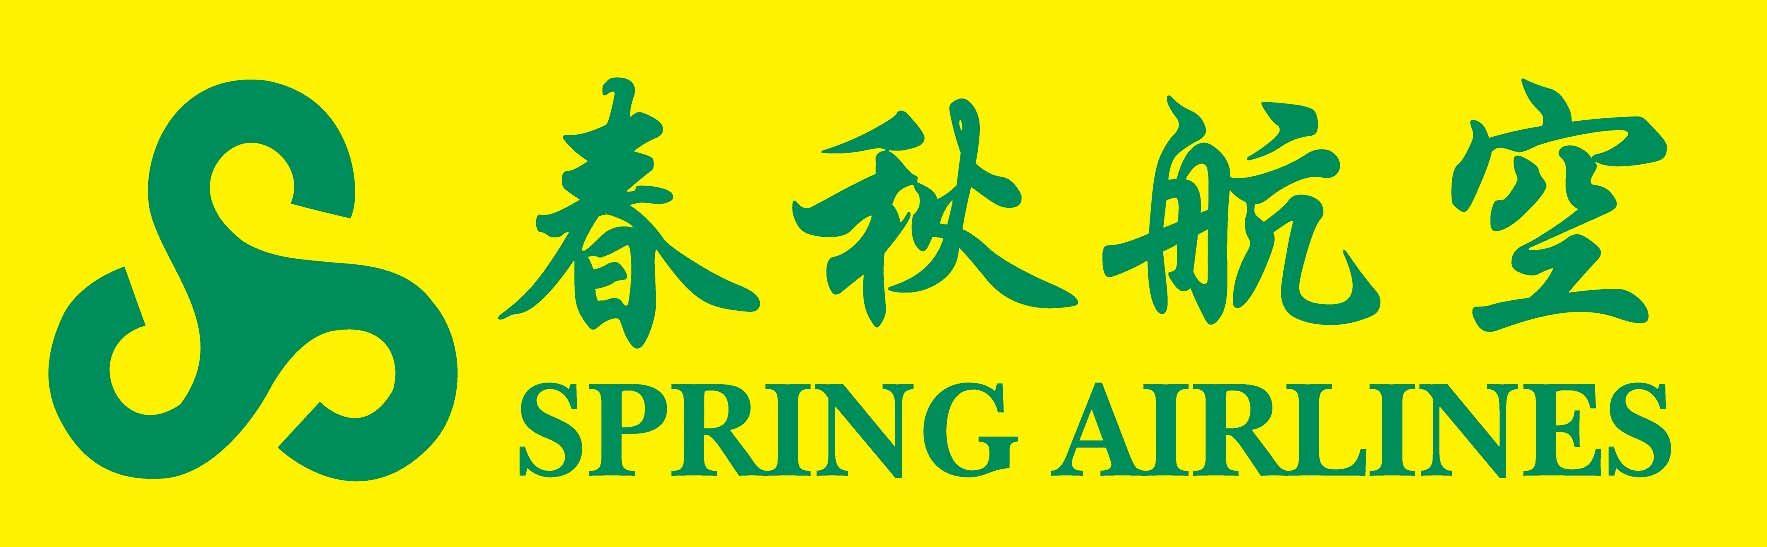 Spring Airlines Logo - File:Logo Spring Airlines.jpg - Wikimedia Commons